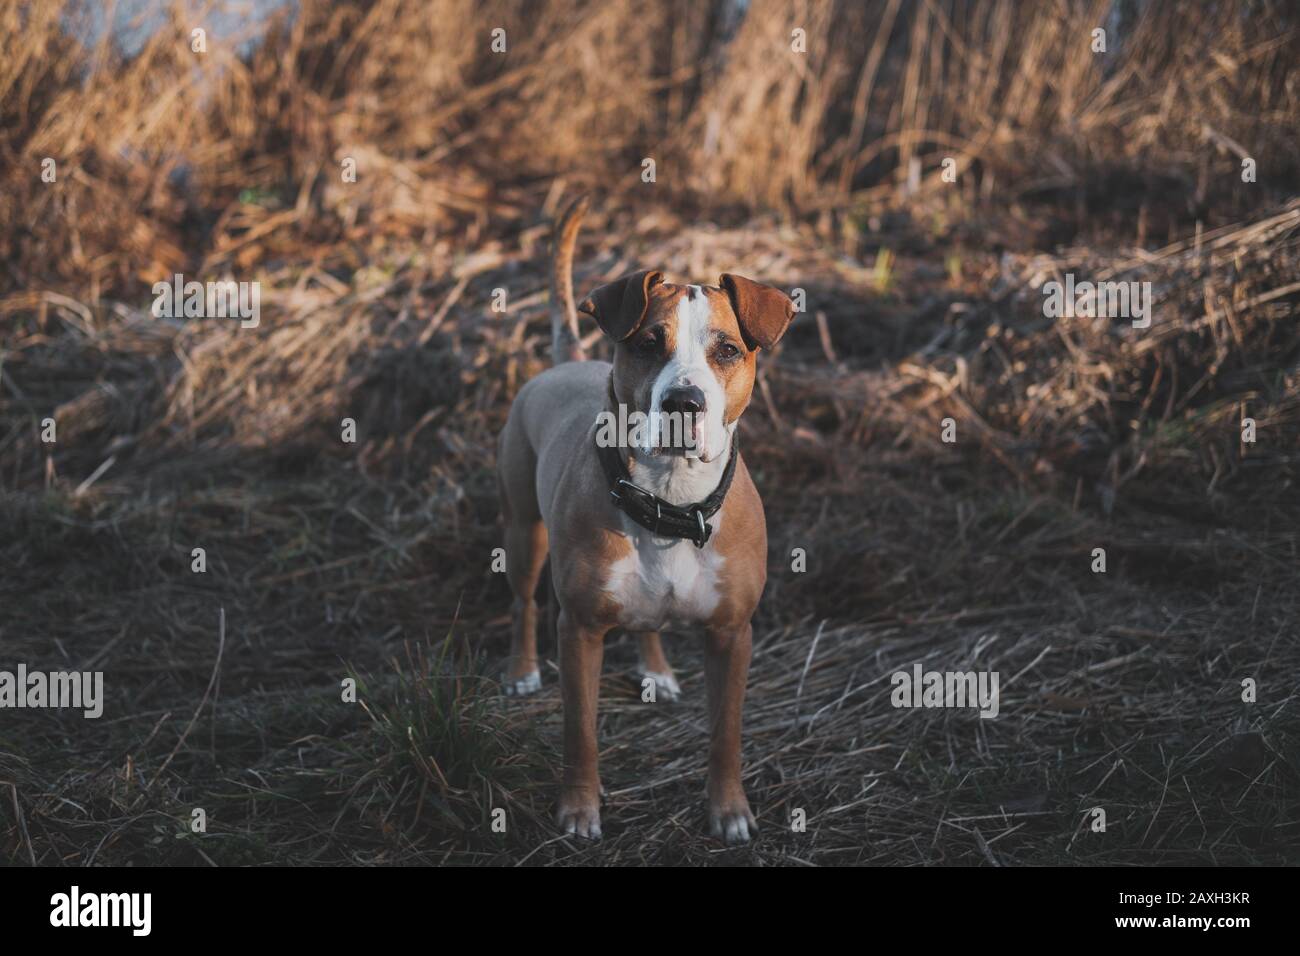 Beautiful dog stands still in faded winter or autumn grass. Portrait of staffordshire terrier mutt looking at camera in sunset among brown grass Stock Photo